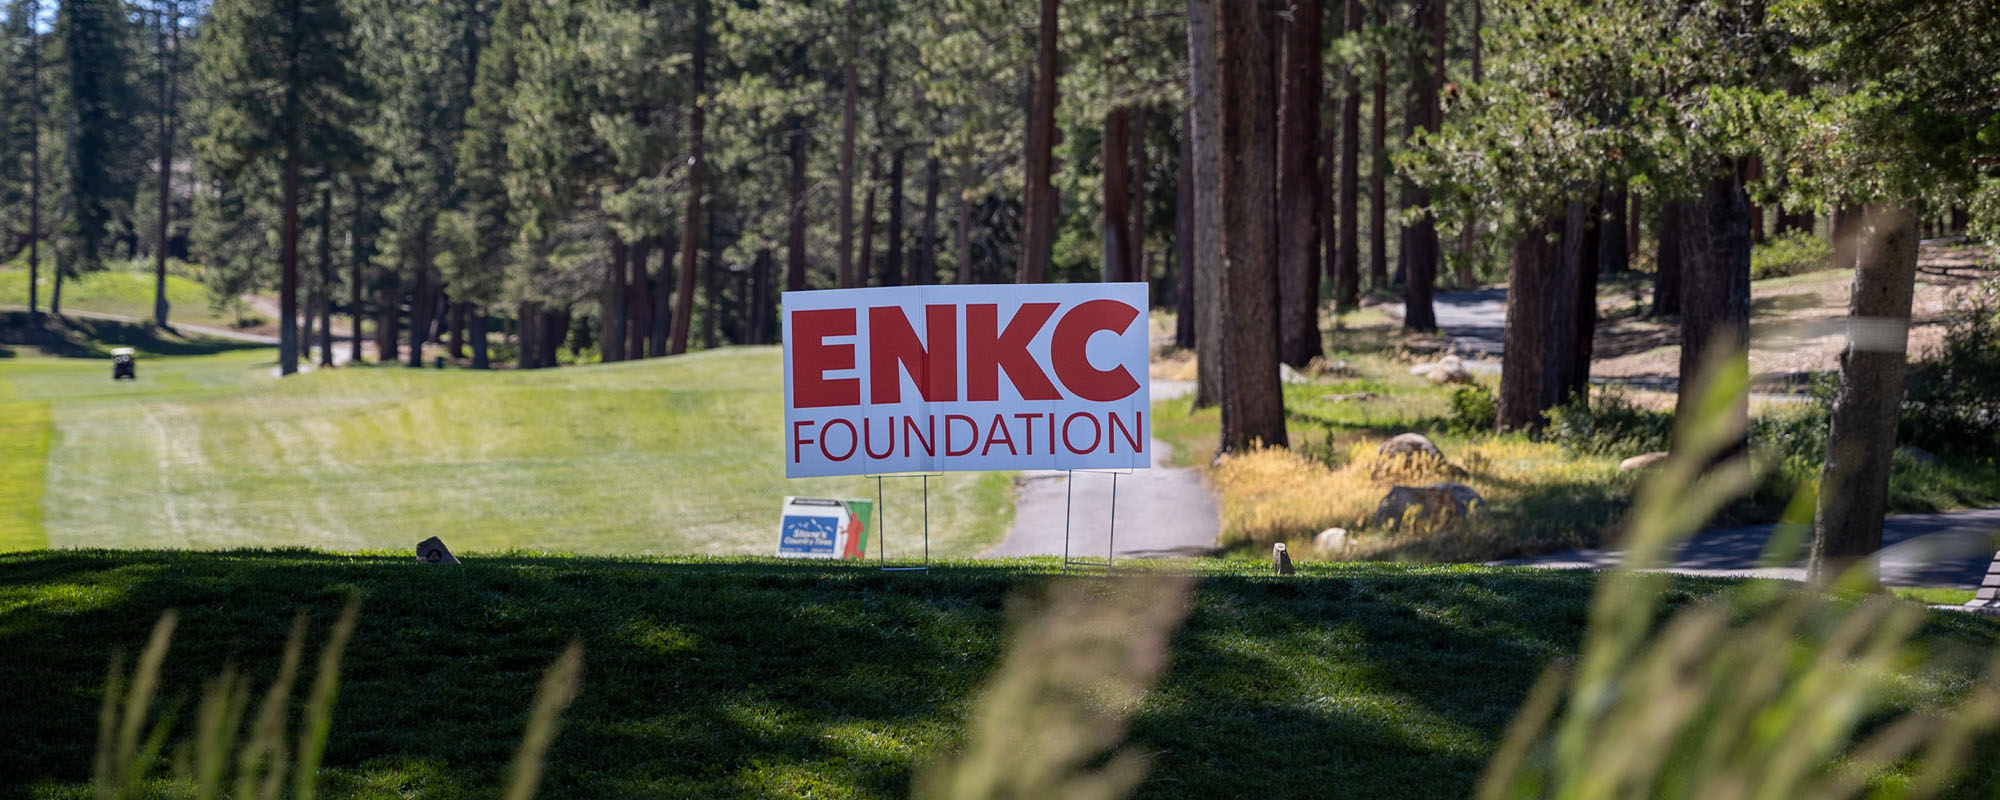 ENKC at Tahoe Donner Golf Couse